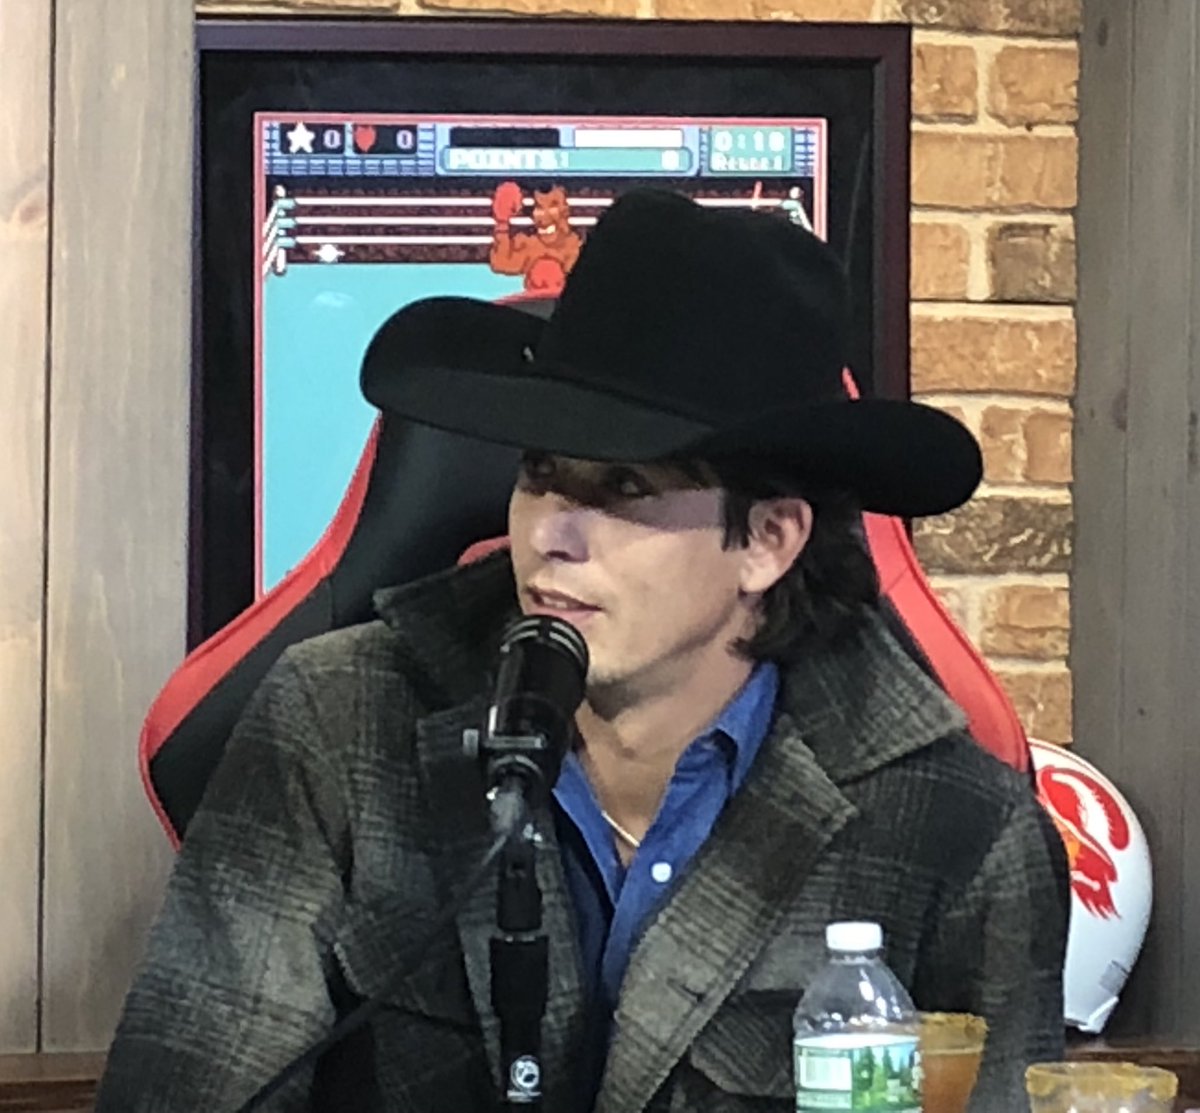 "JB, do you have anything interesting you place inside your cowboy hat?" 